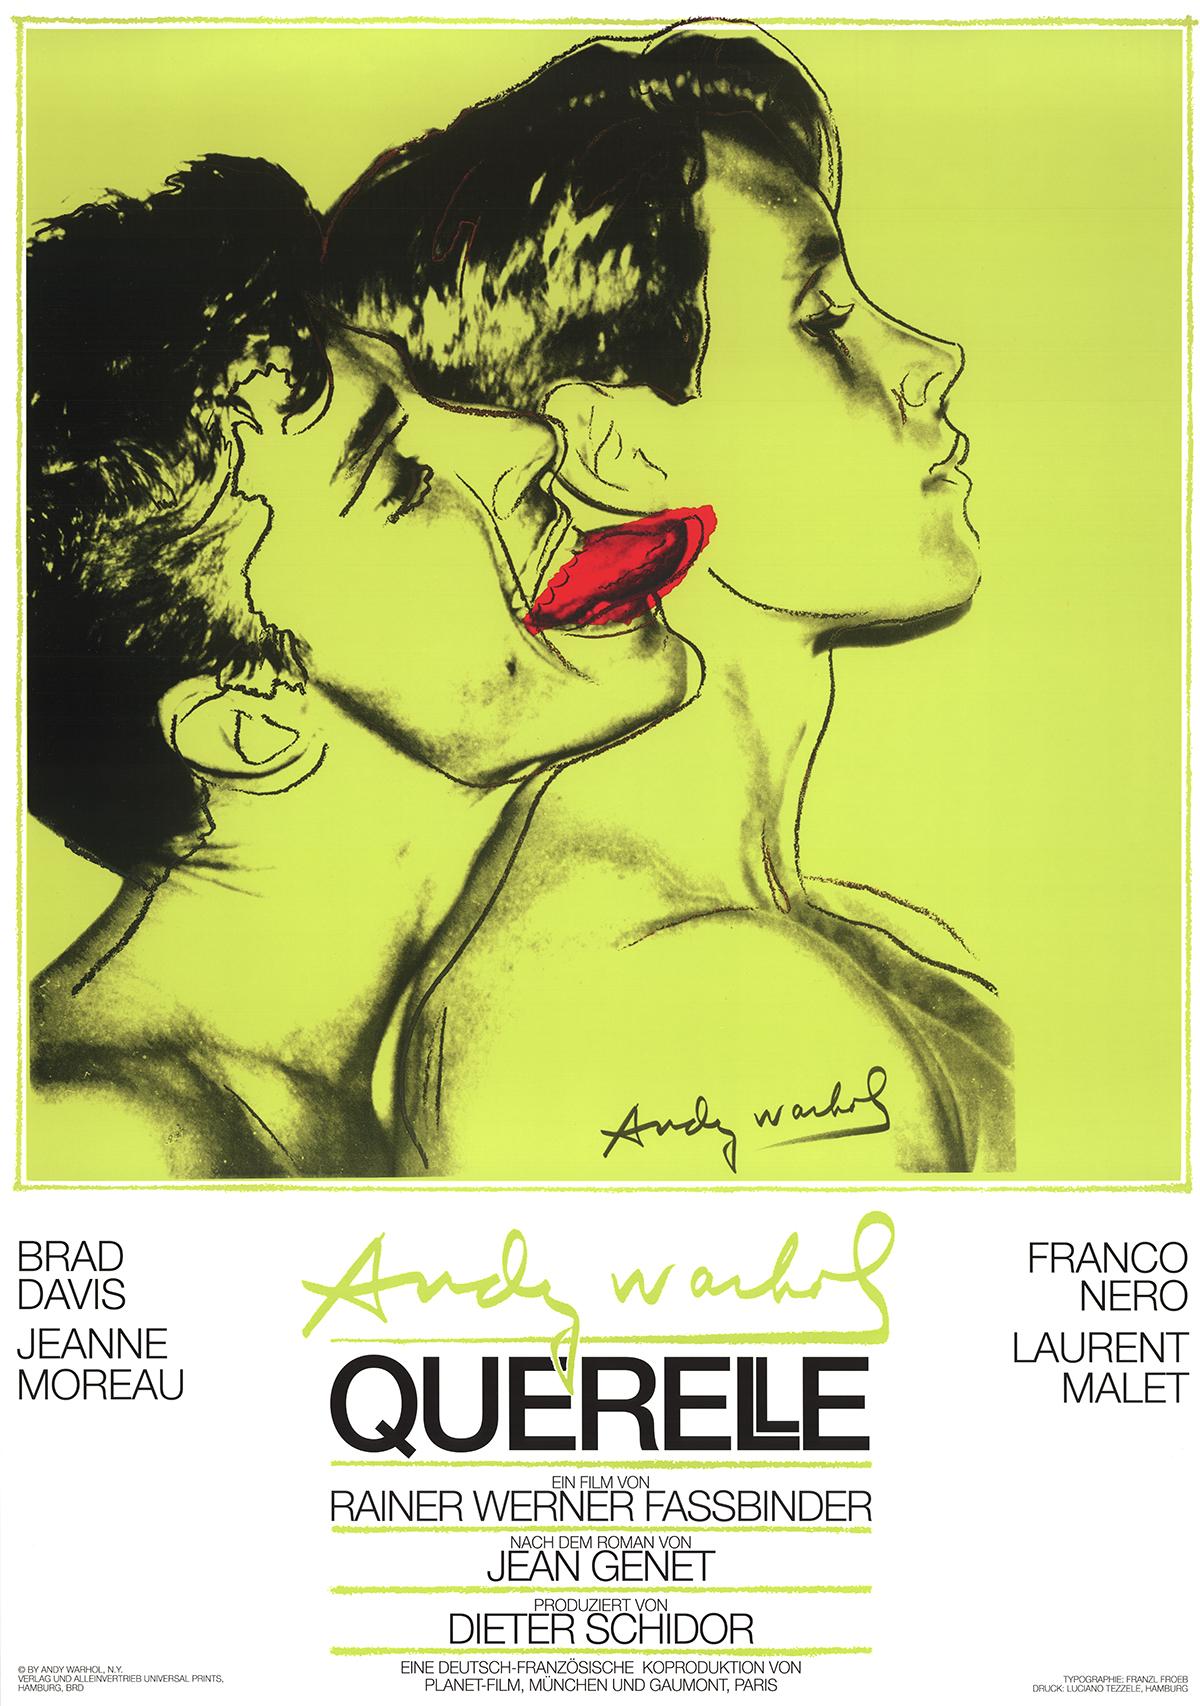 Andy Warhol-Querelle -Poster-1983- FIRST EDITION  - Print by (after) Andy Warhol